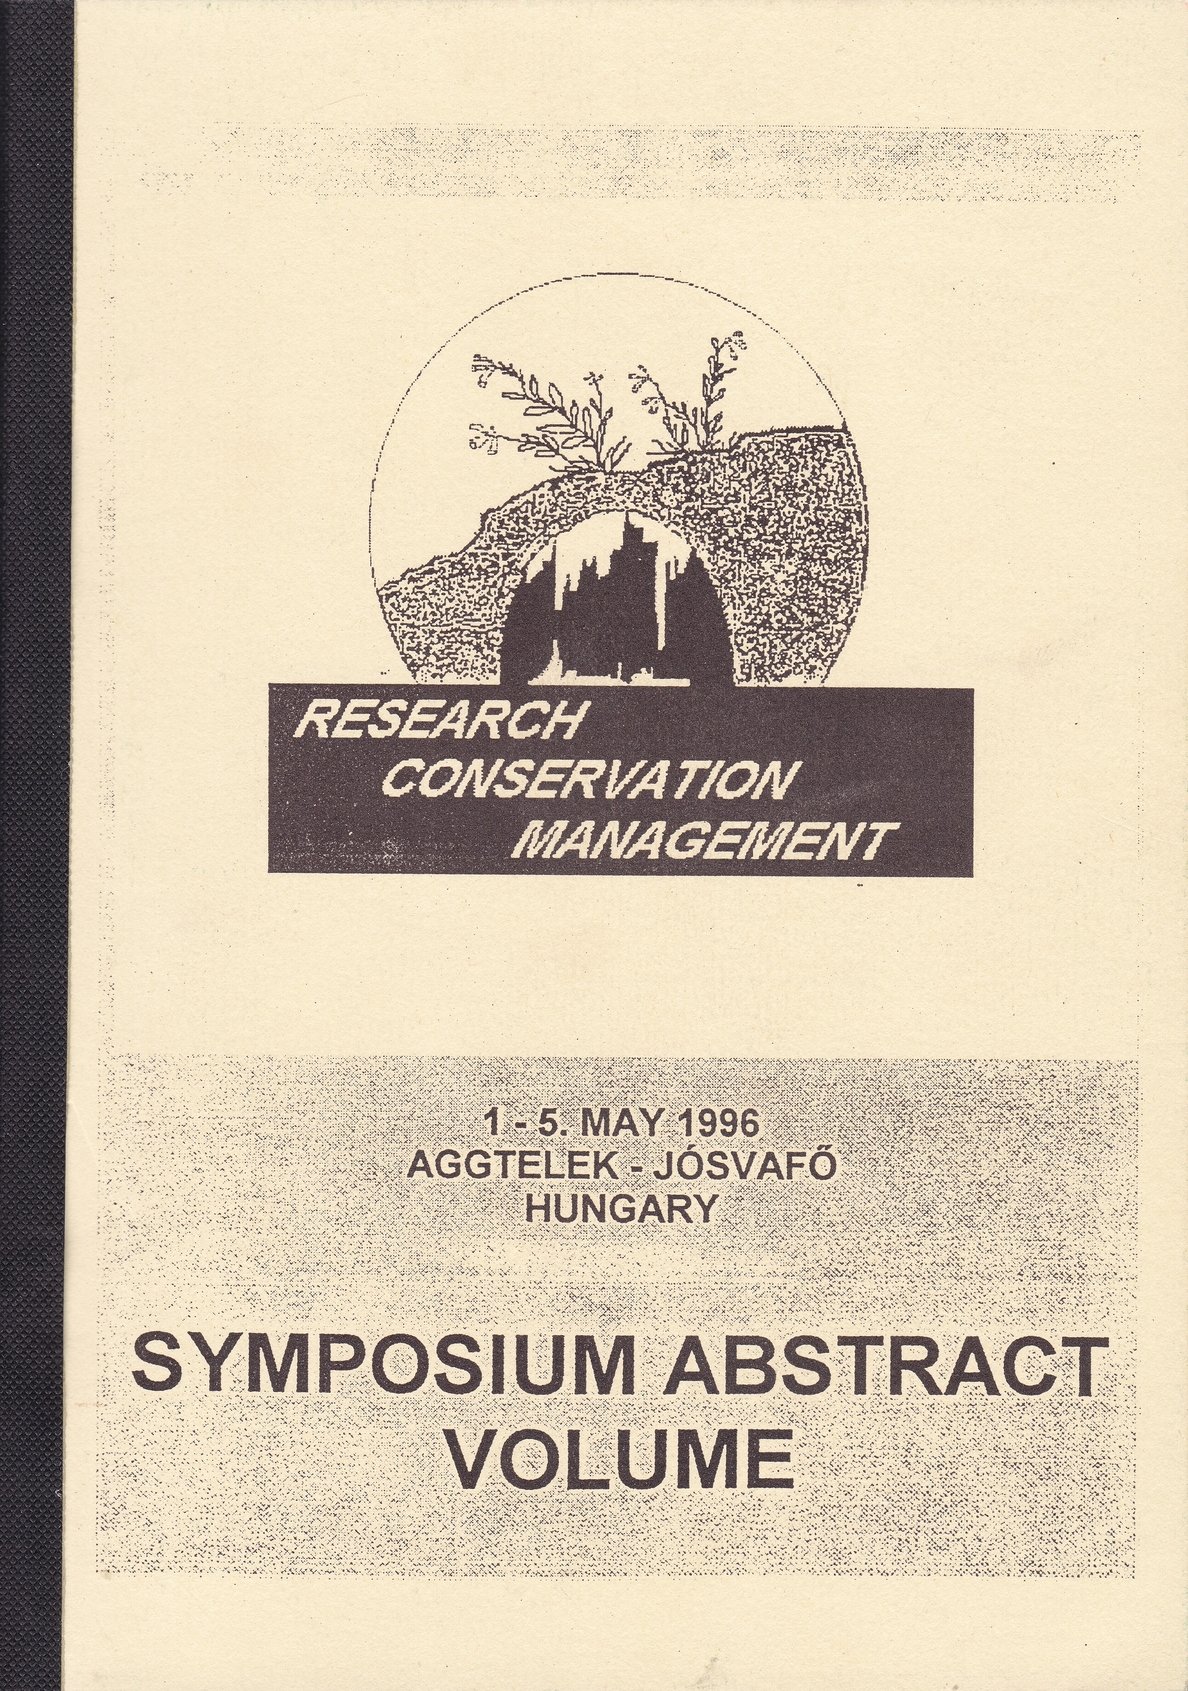 Abstracts of the "Symposium on Research, Conservation, Management", 1-5 May, 1996, Aggtelek-Jósvafő, Hungary (Rippl-Rónai Múzeum CC BY-NC-ND)